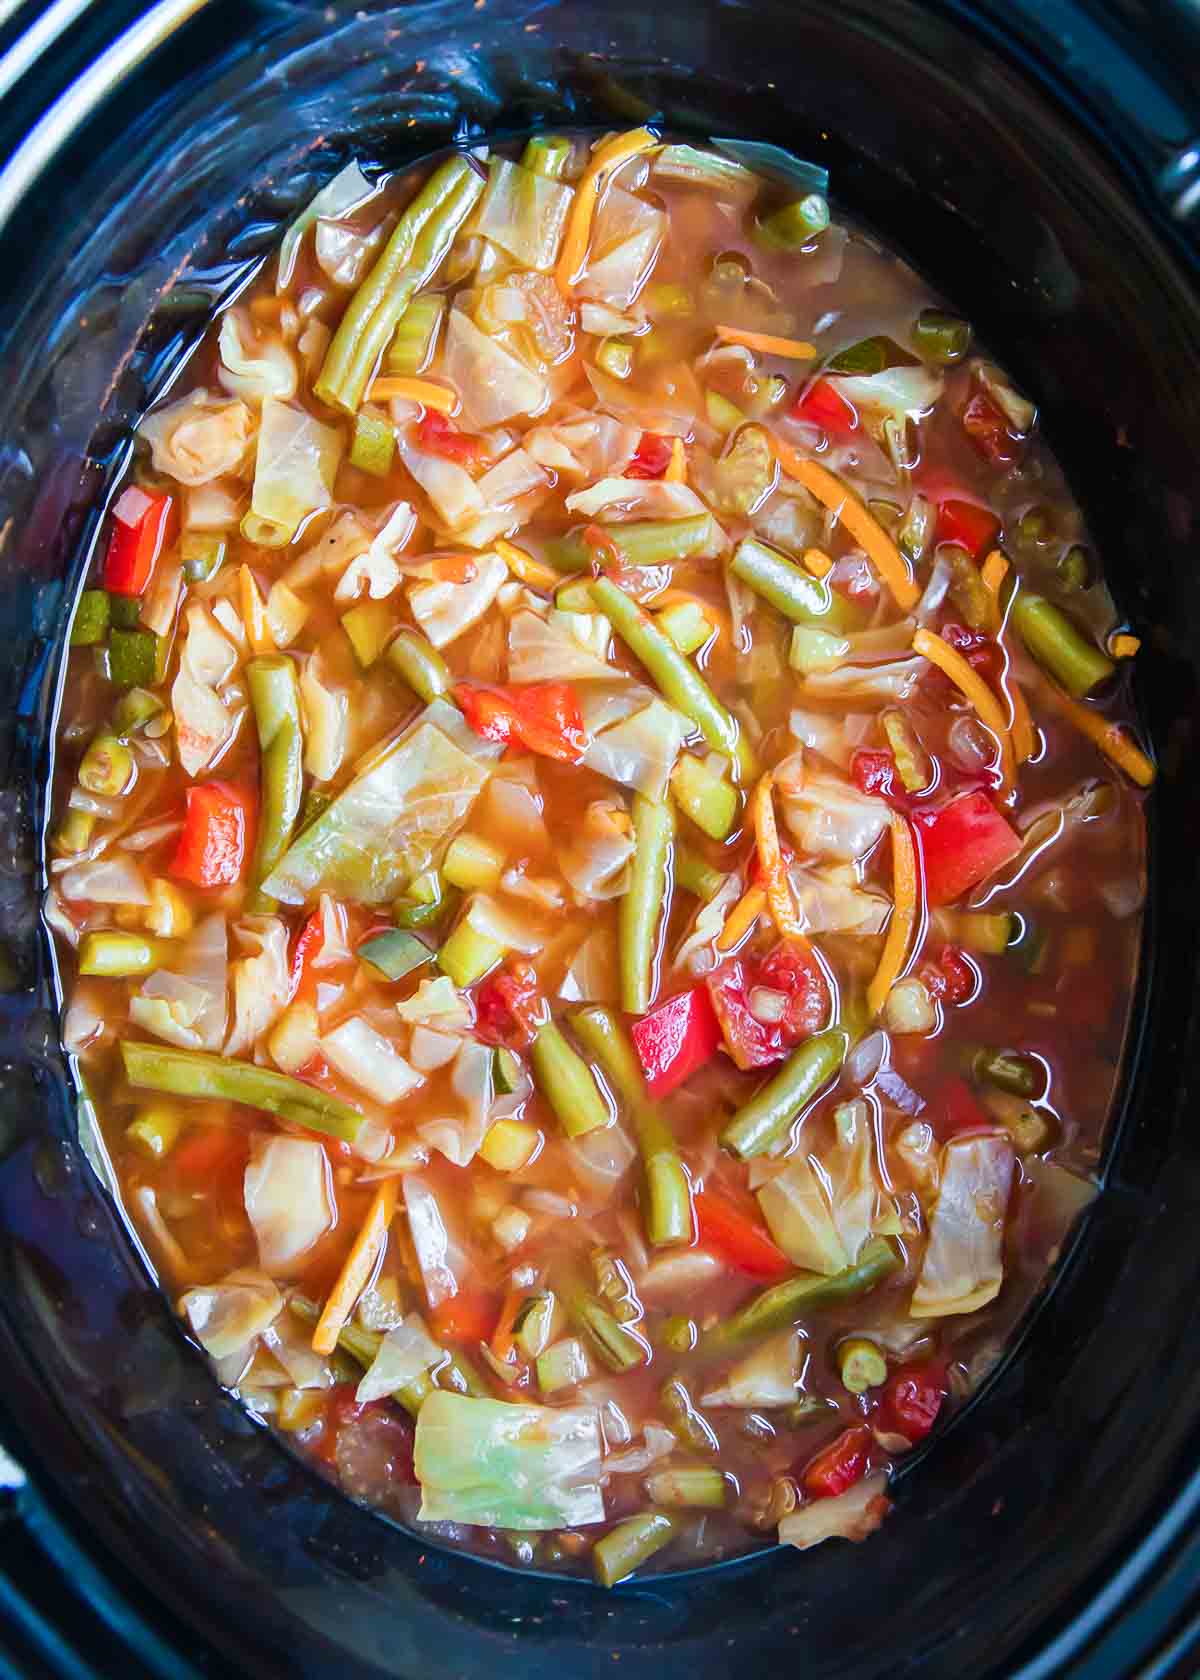 Cabbage soup in a crockpot.